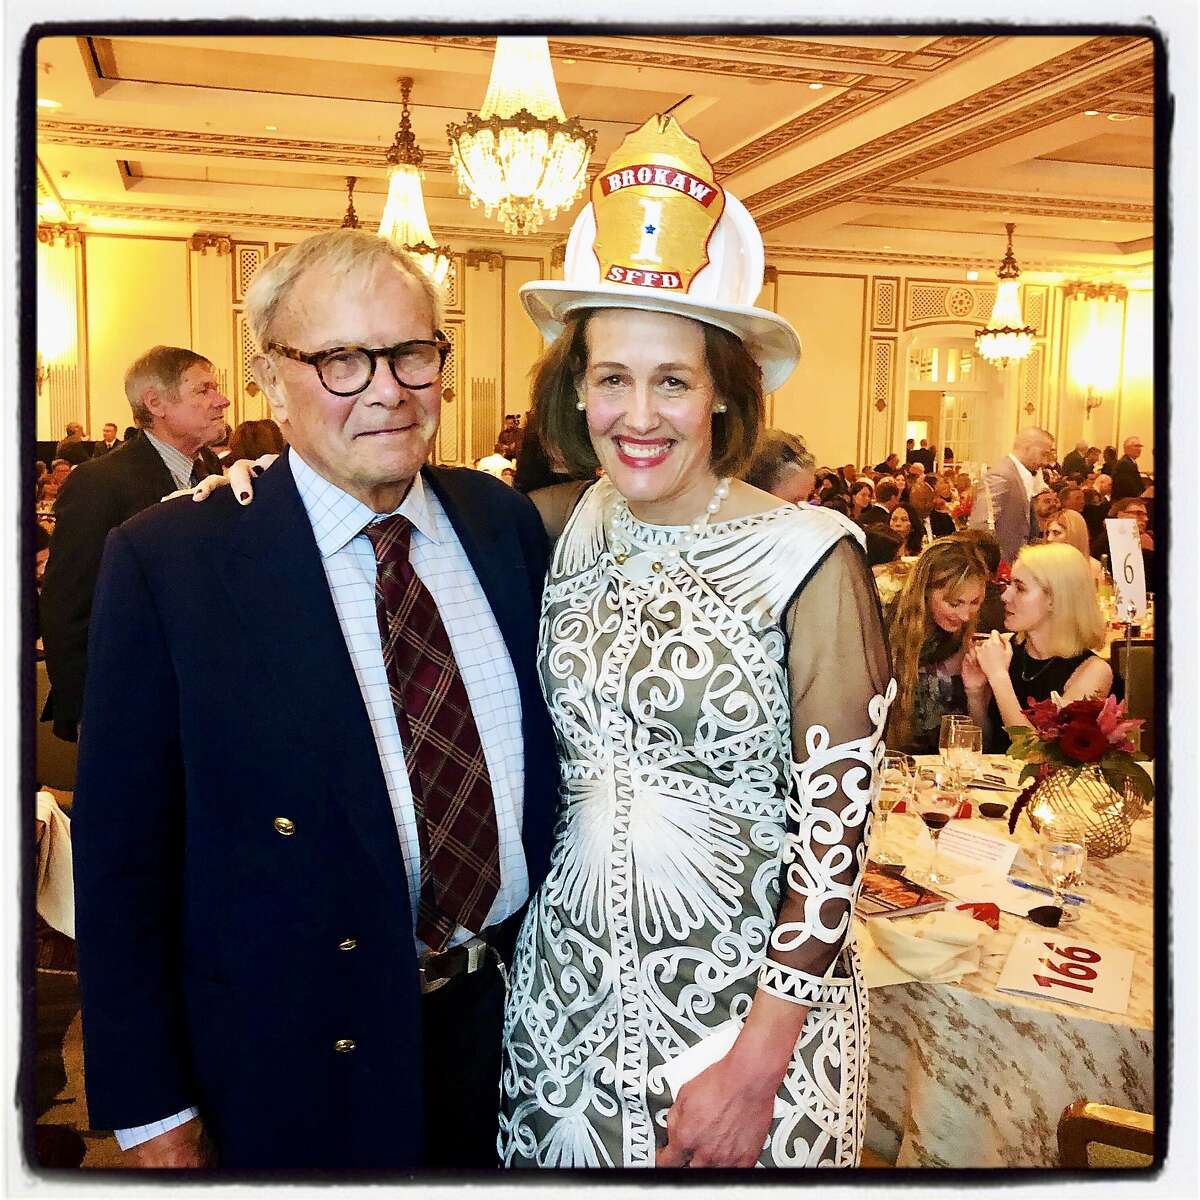 Newsman Tom Brokaw and his daughter, Dr. Jennifer Brokaw, at the Art of Fire Gala. March 23, 2019.